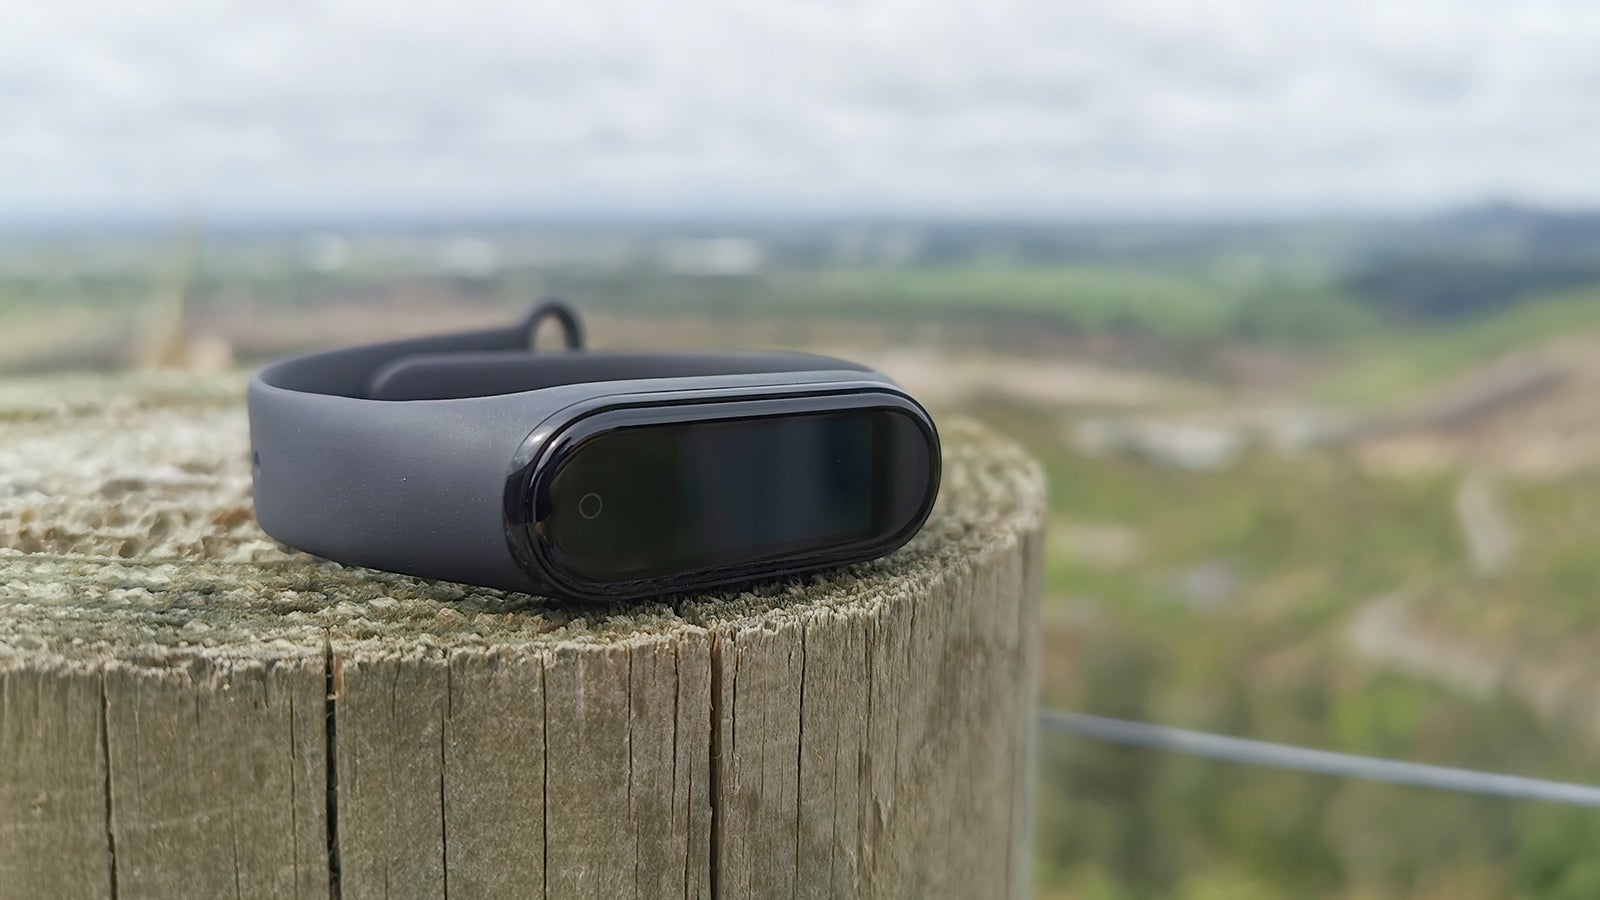 Xiaomi Mi Band 4 Review: An absolute bargain fitness tracker